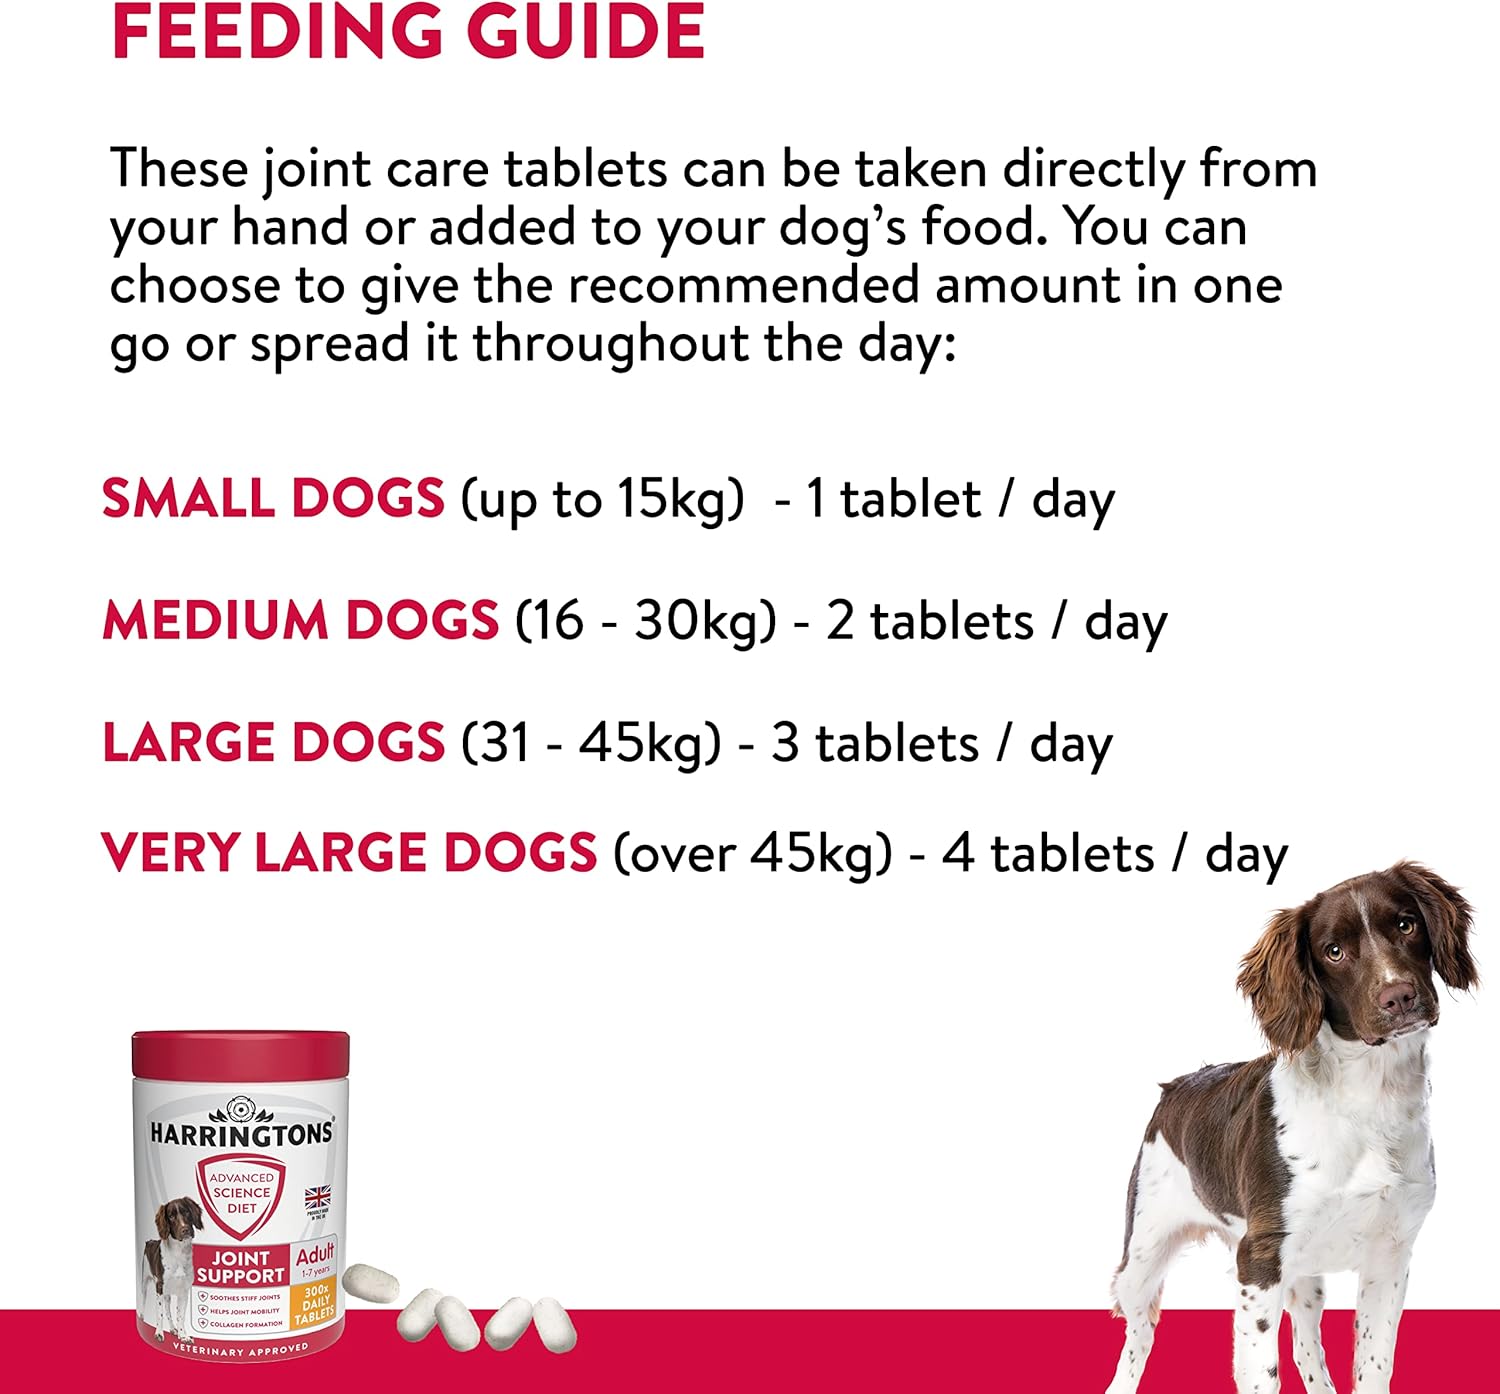 Harringtons Advanced Science Adult Dog Joint Care Supplements 300x Tablets - High Source of Omega 3, Vitamin C & E :Prime Video